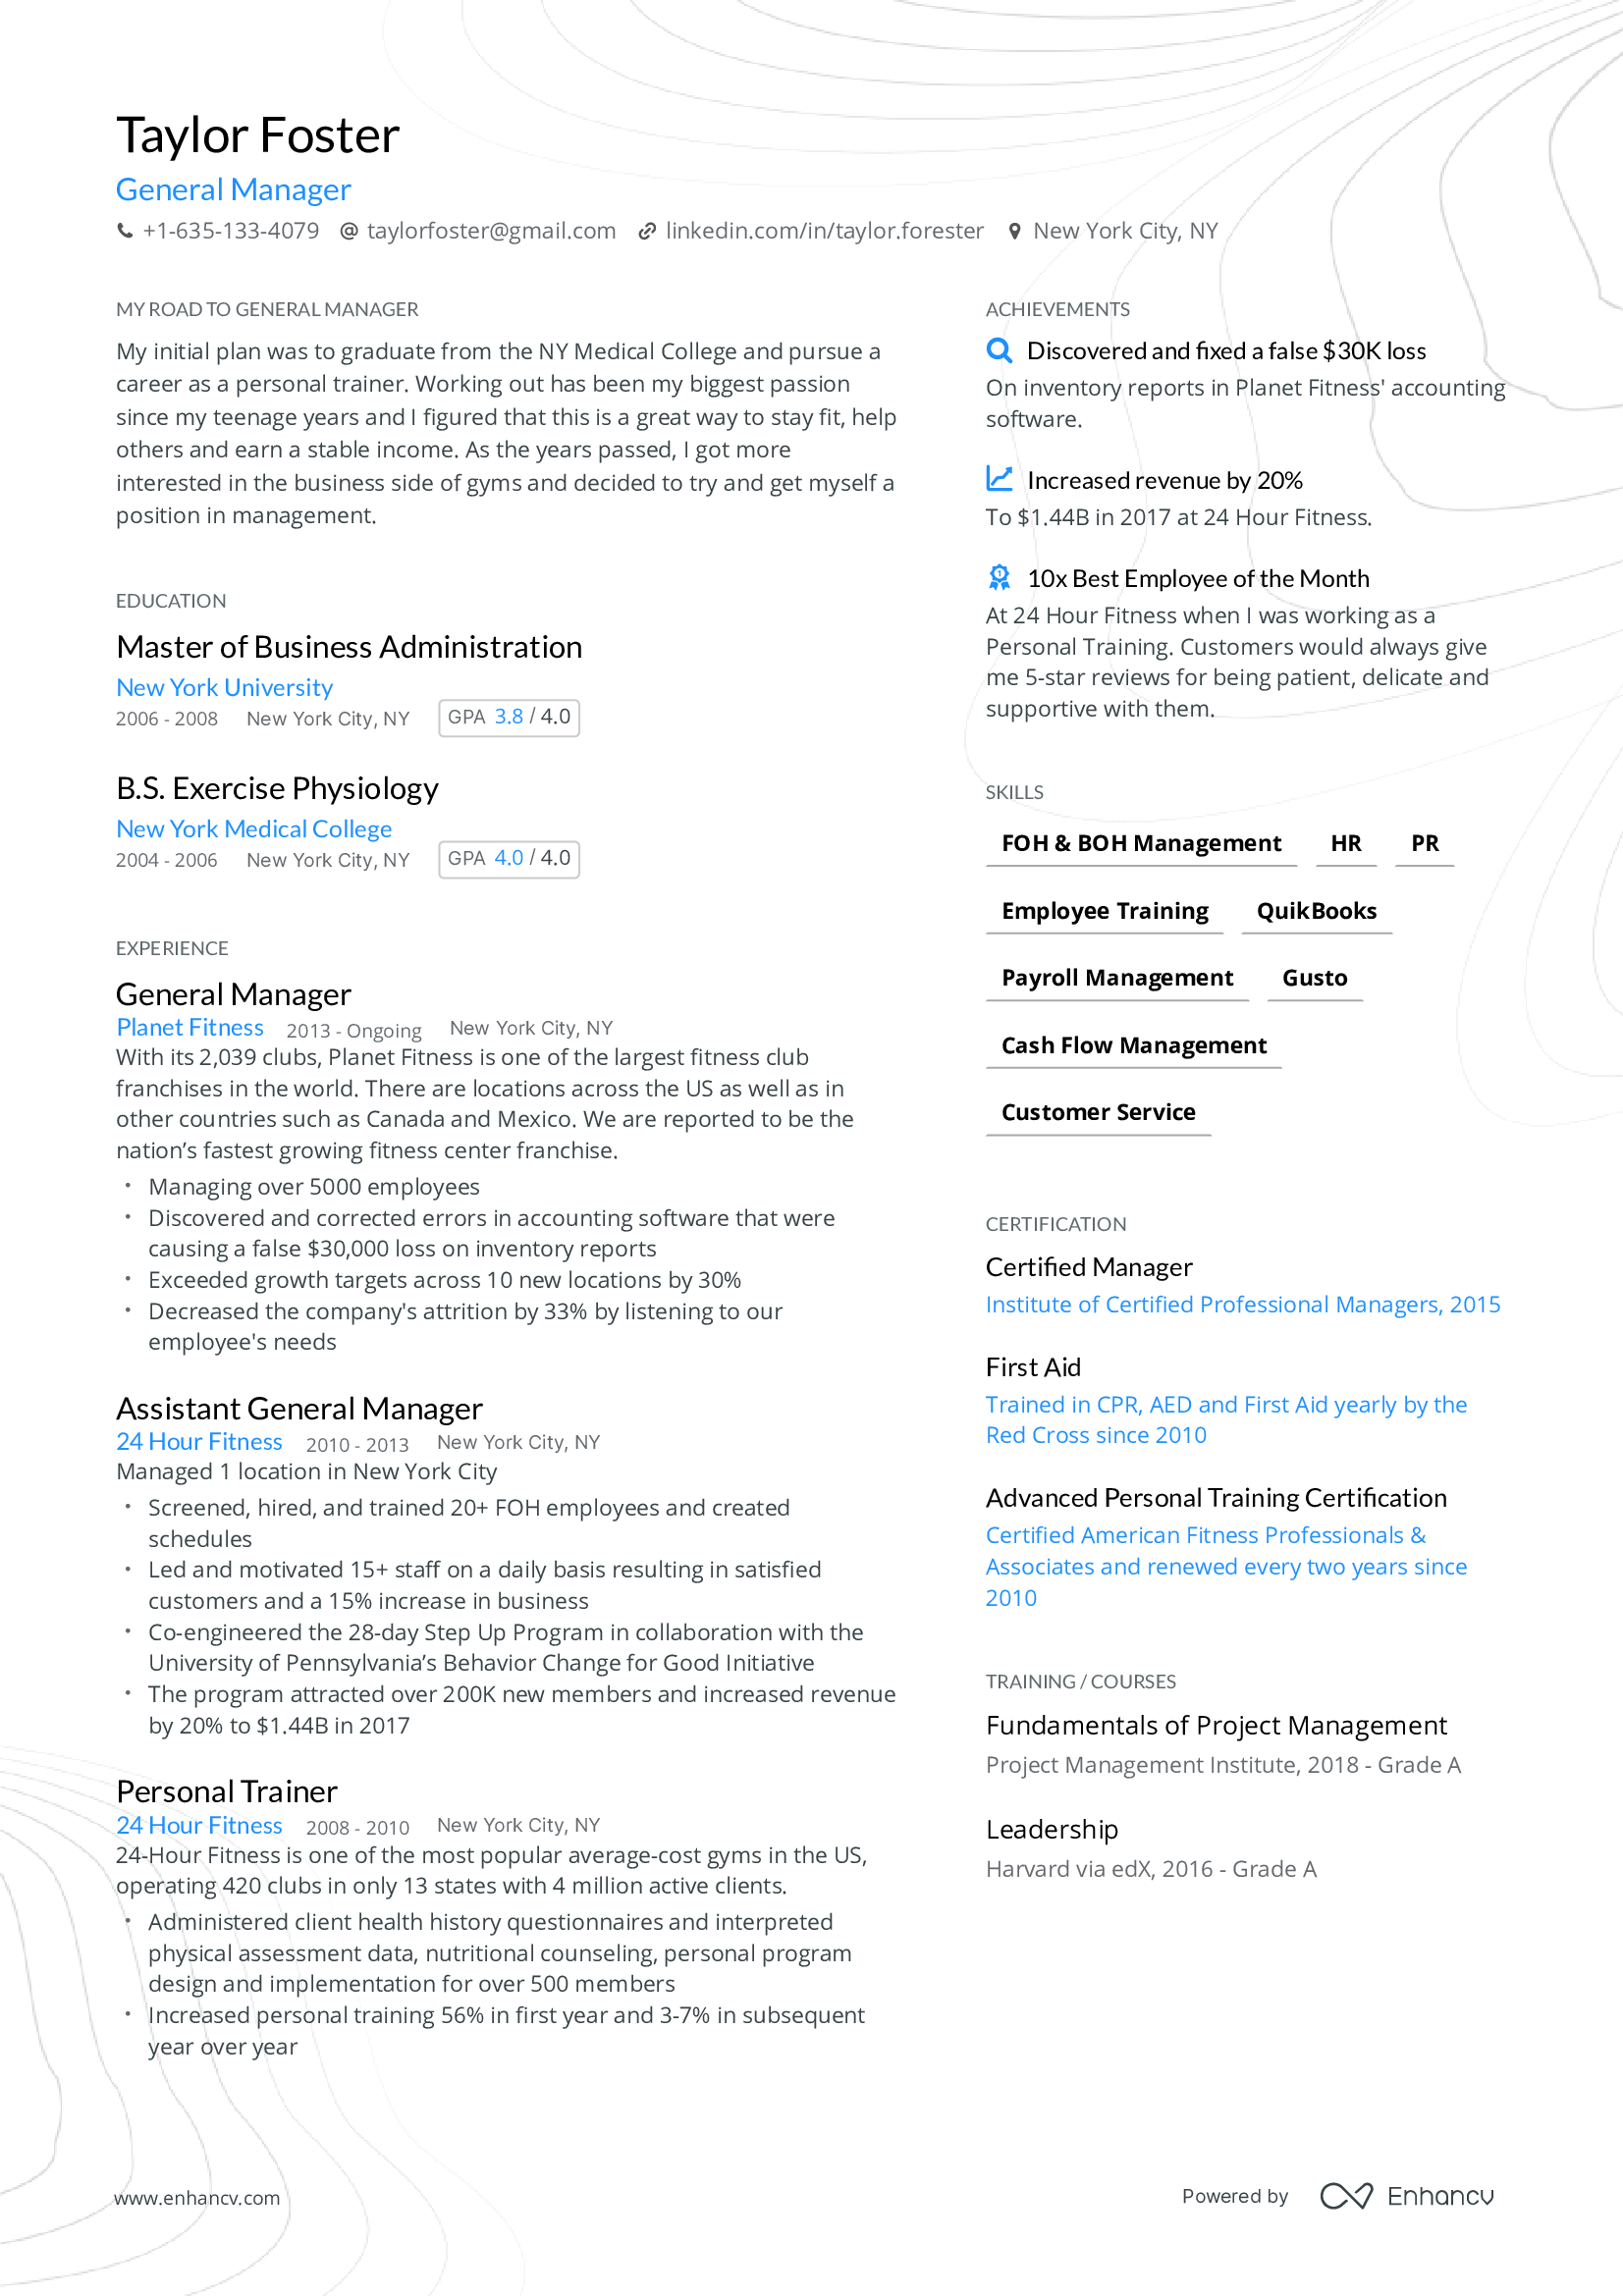 A compact resume template perfect for fitting a lot of information yet keeping your resume on a single page. Blue accent color.